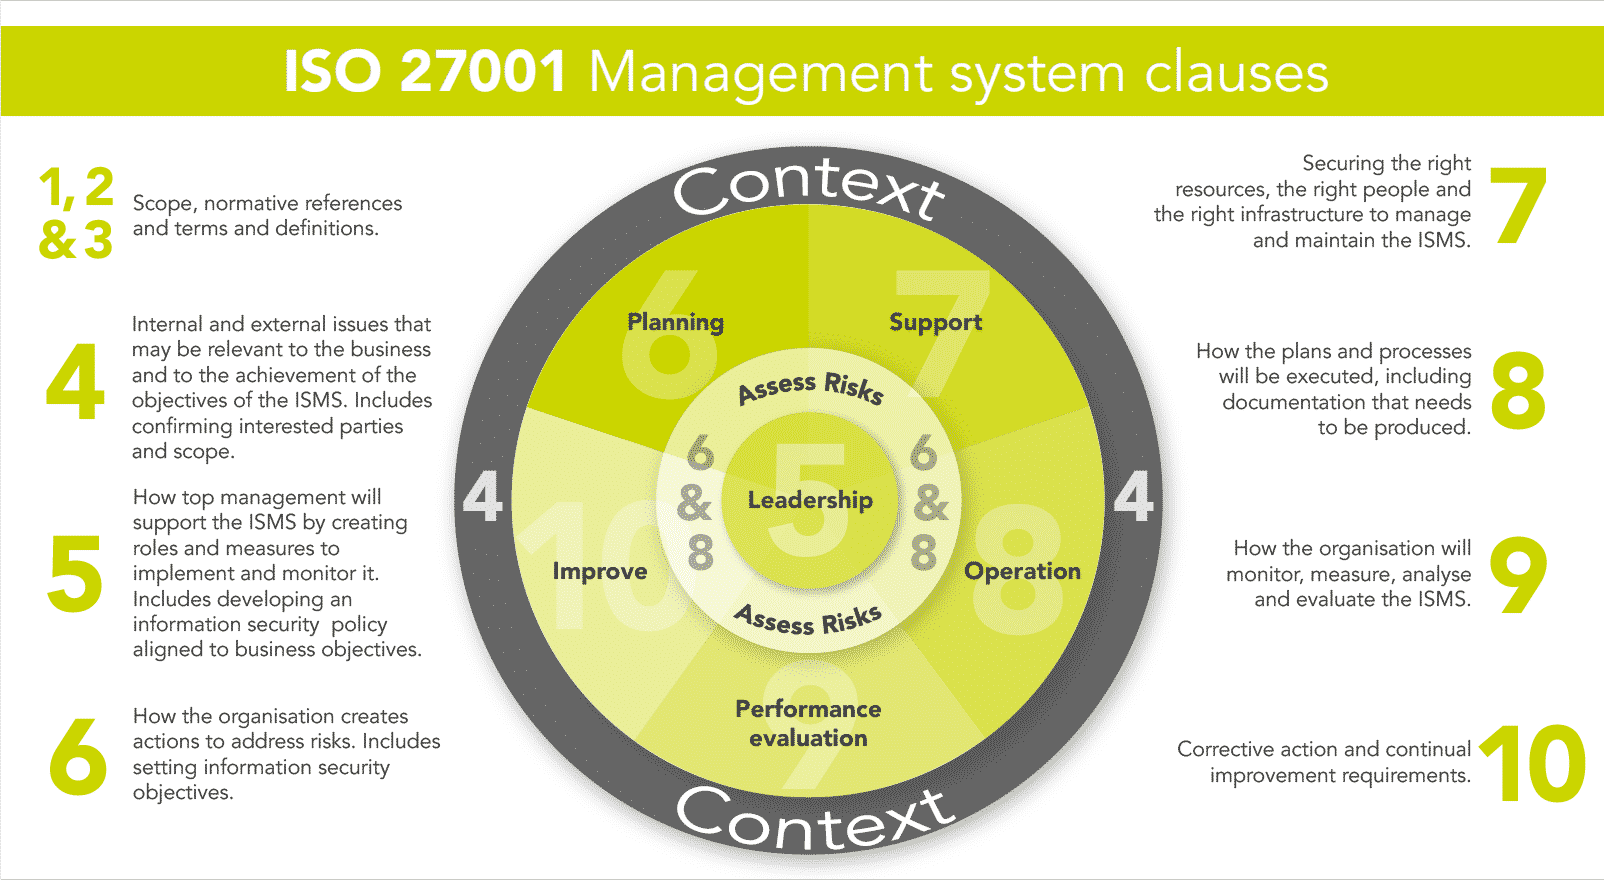 How to define context of the organization according to ISO 27001